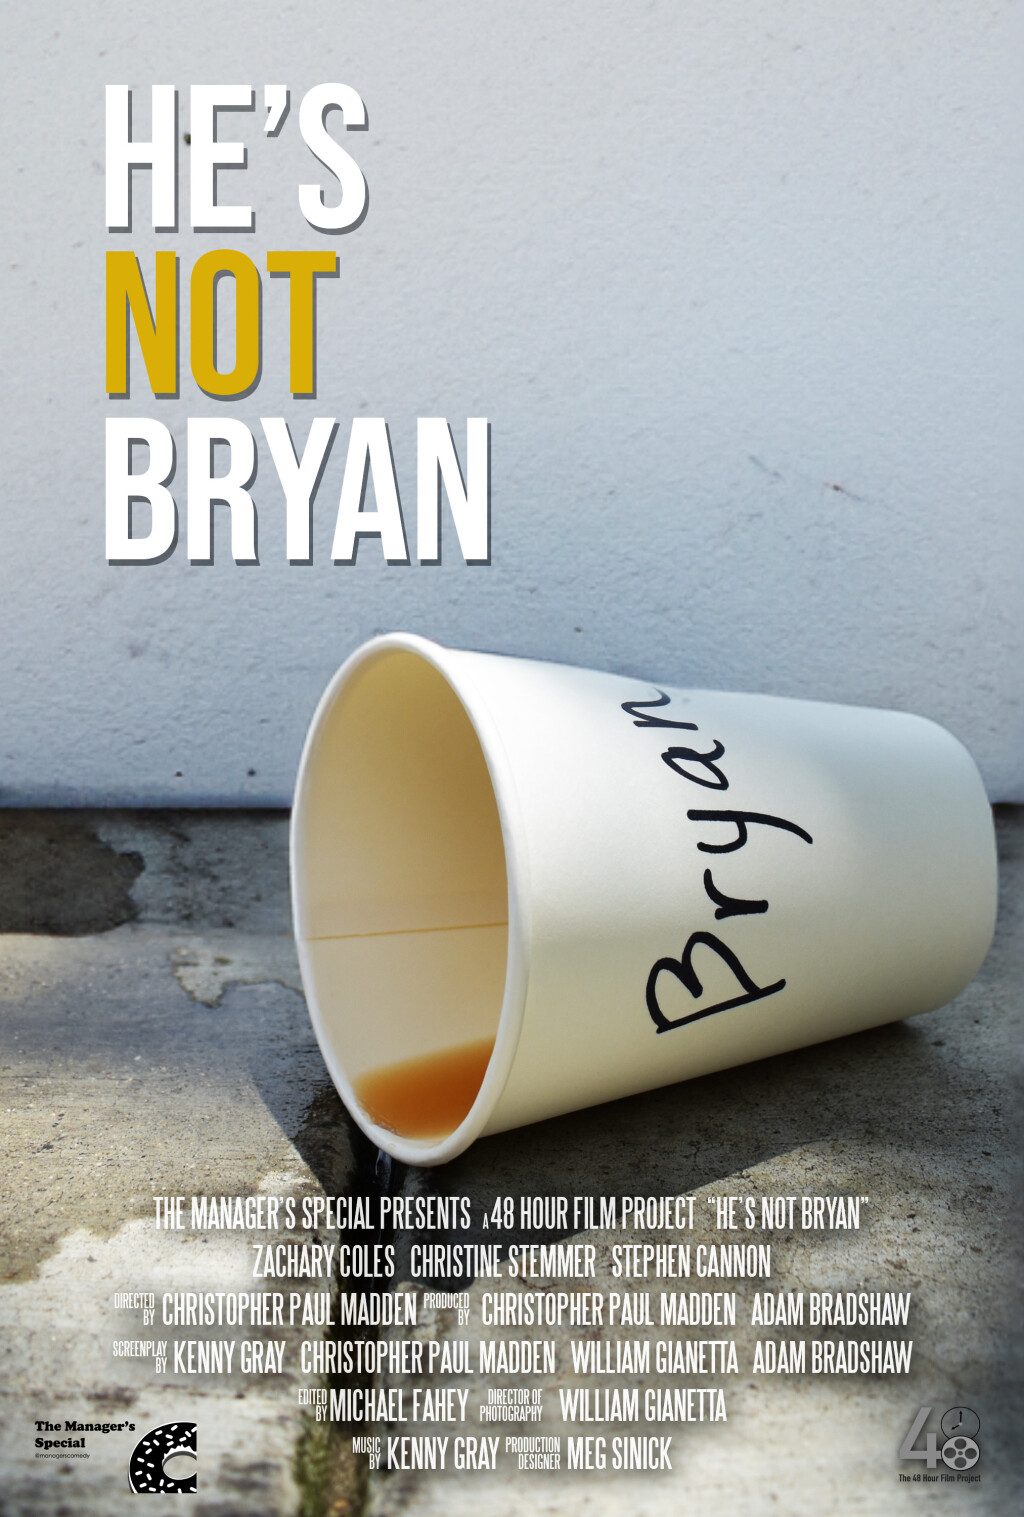 Filmposter for he's not bryan